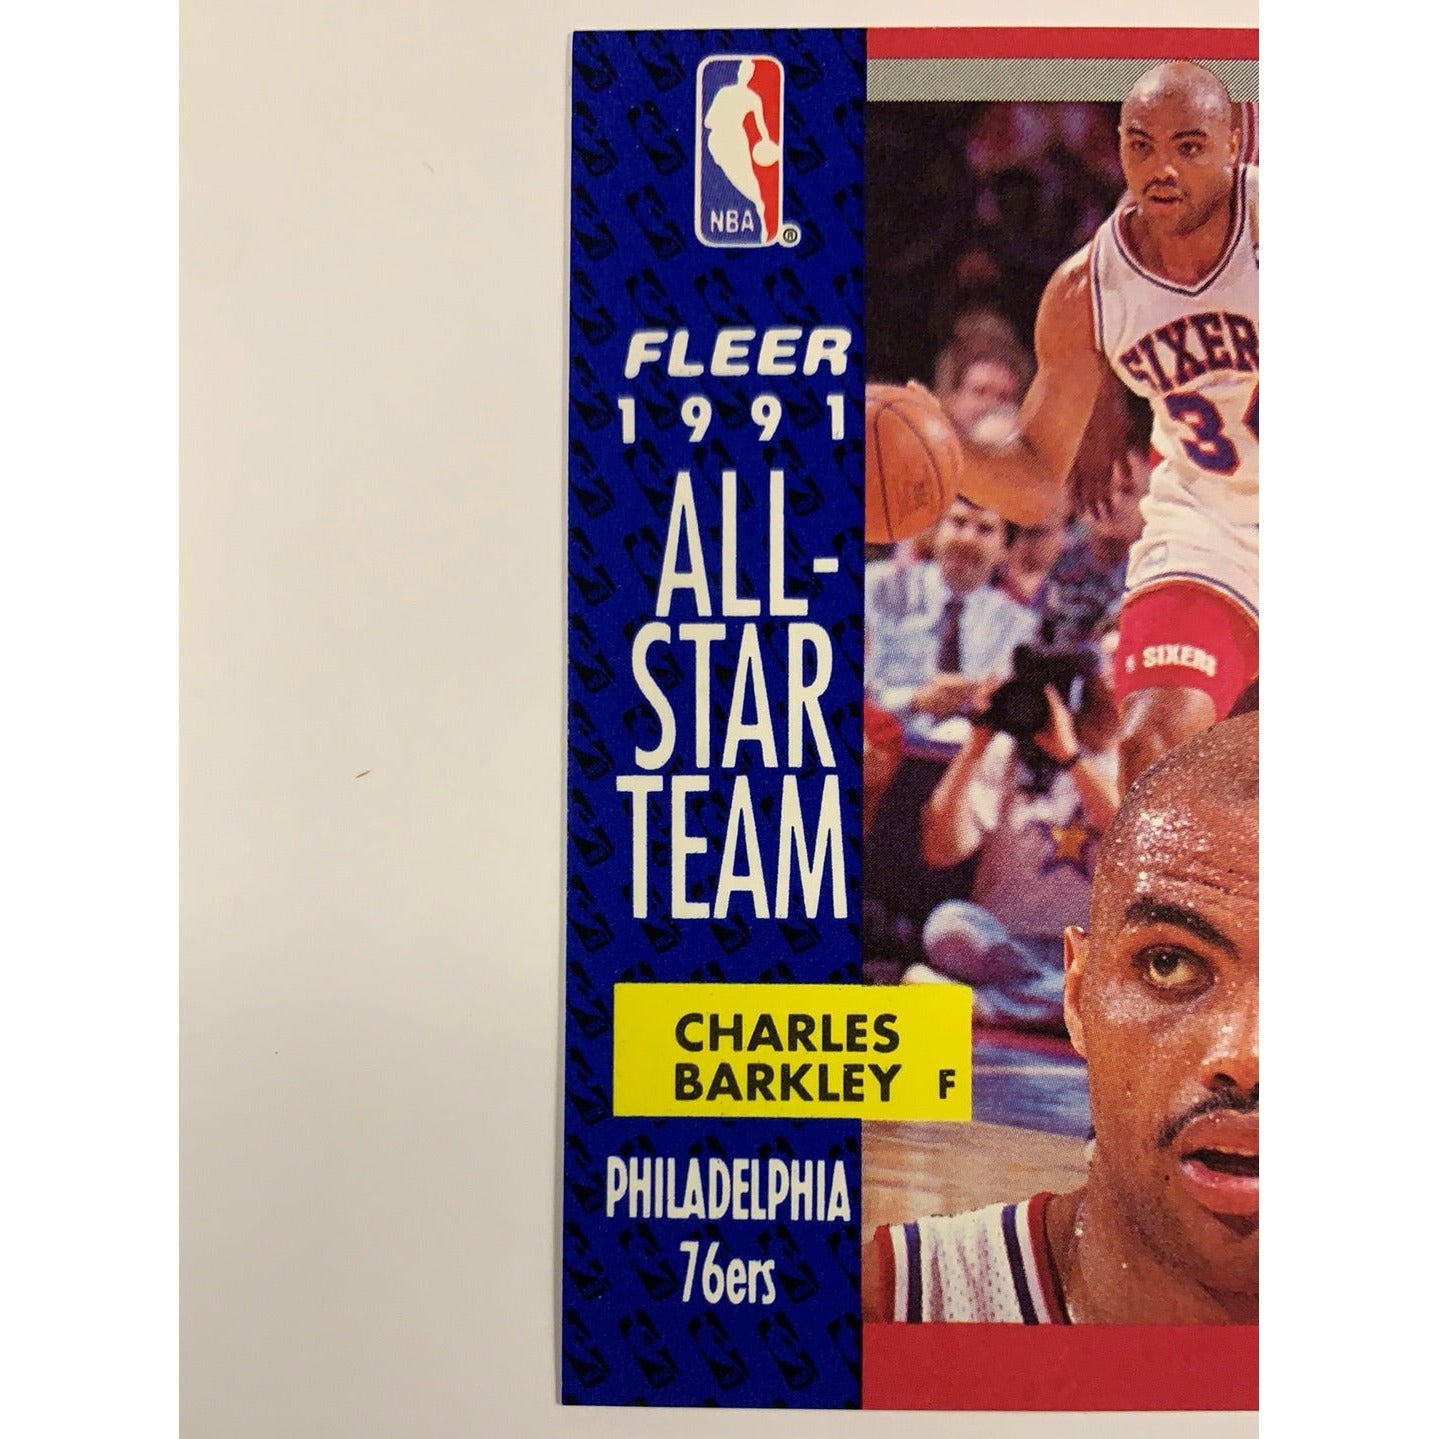  1990-91 Fleer Charles Barkley All Star Team  Local Legends Cards & Collectibles